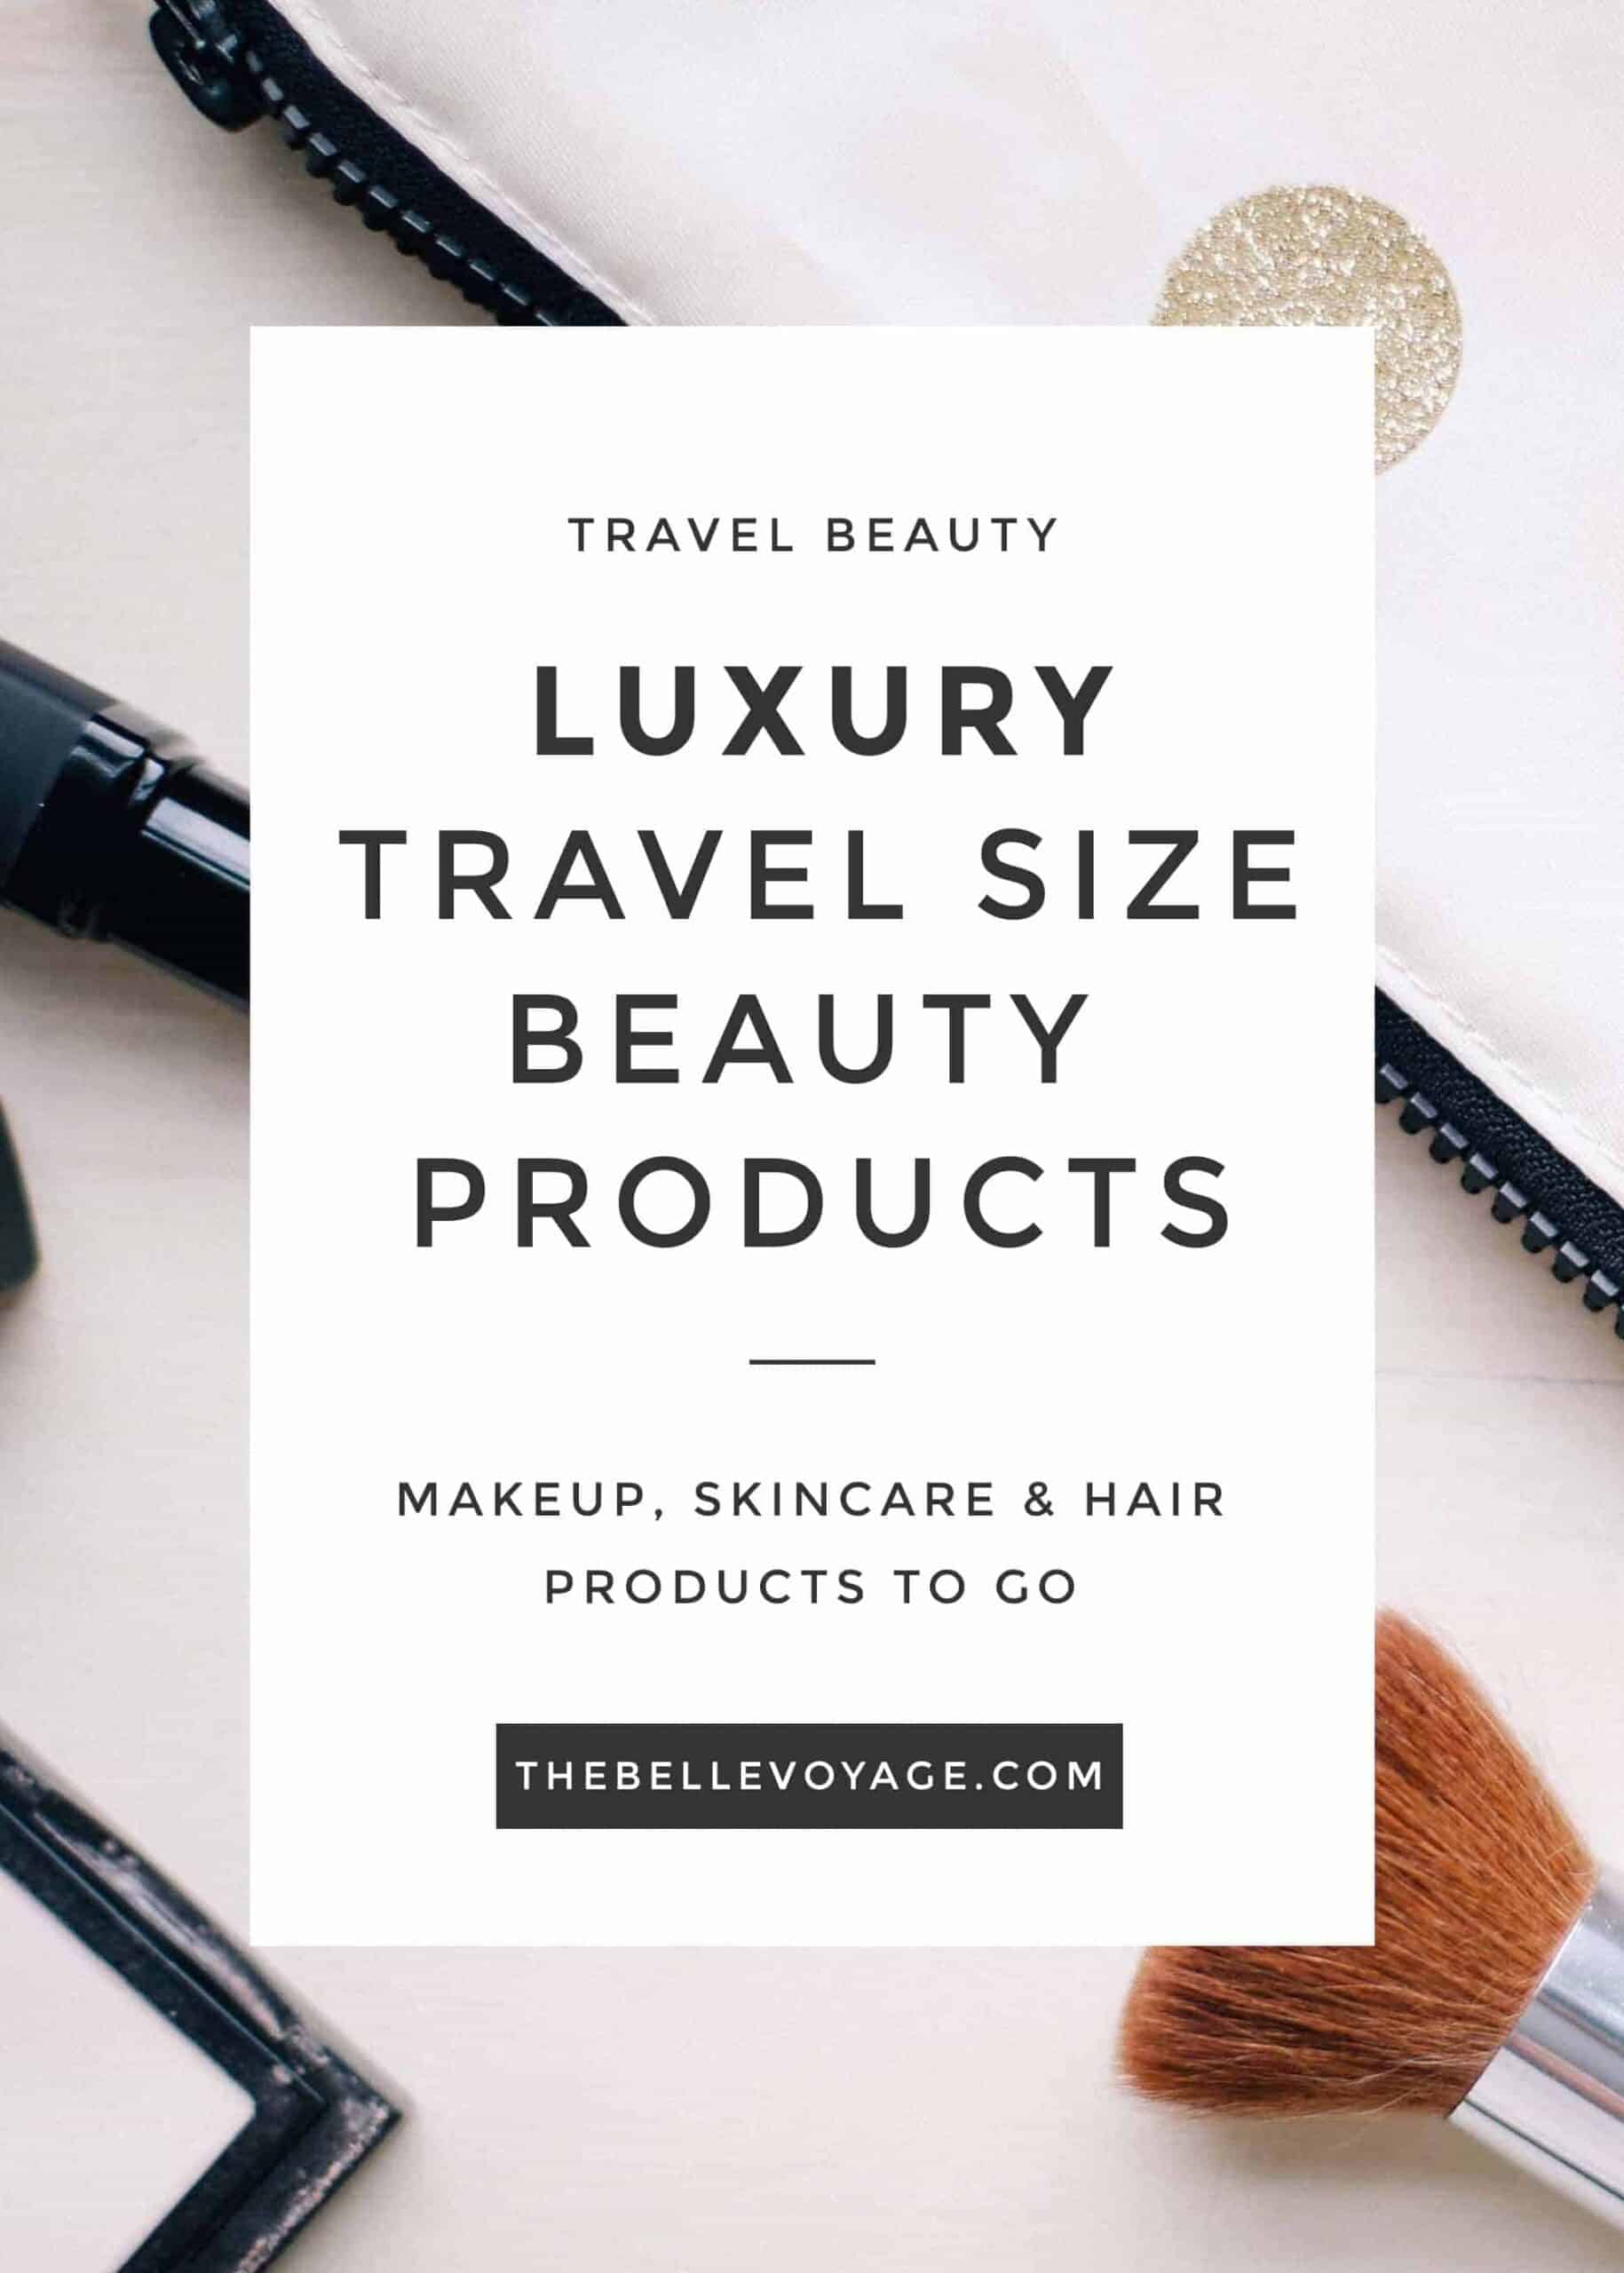 Travel Size Beauty Products You Didn’t Know Existed